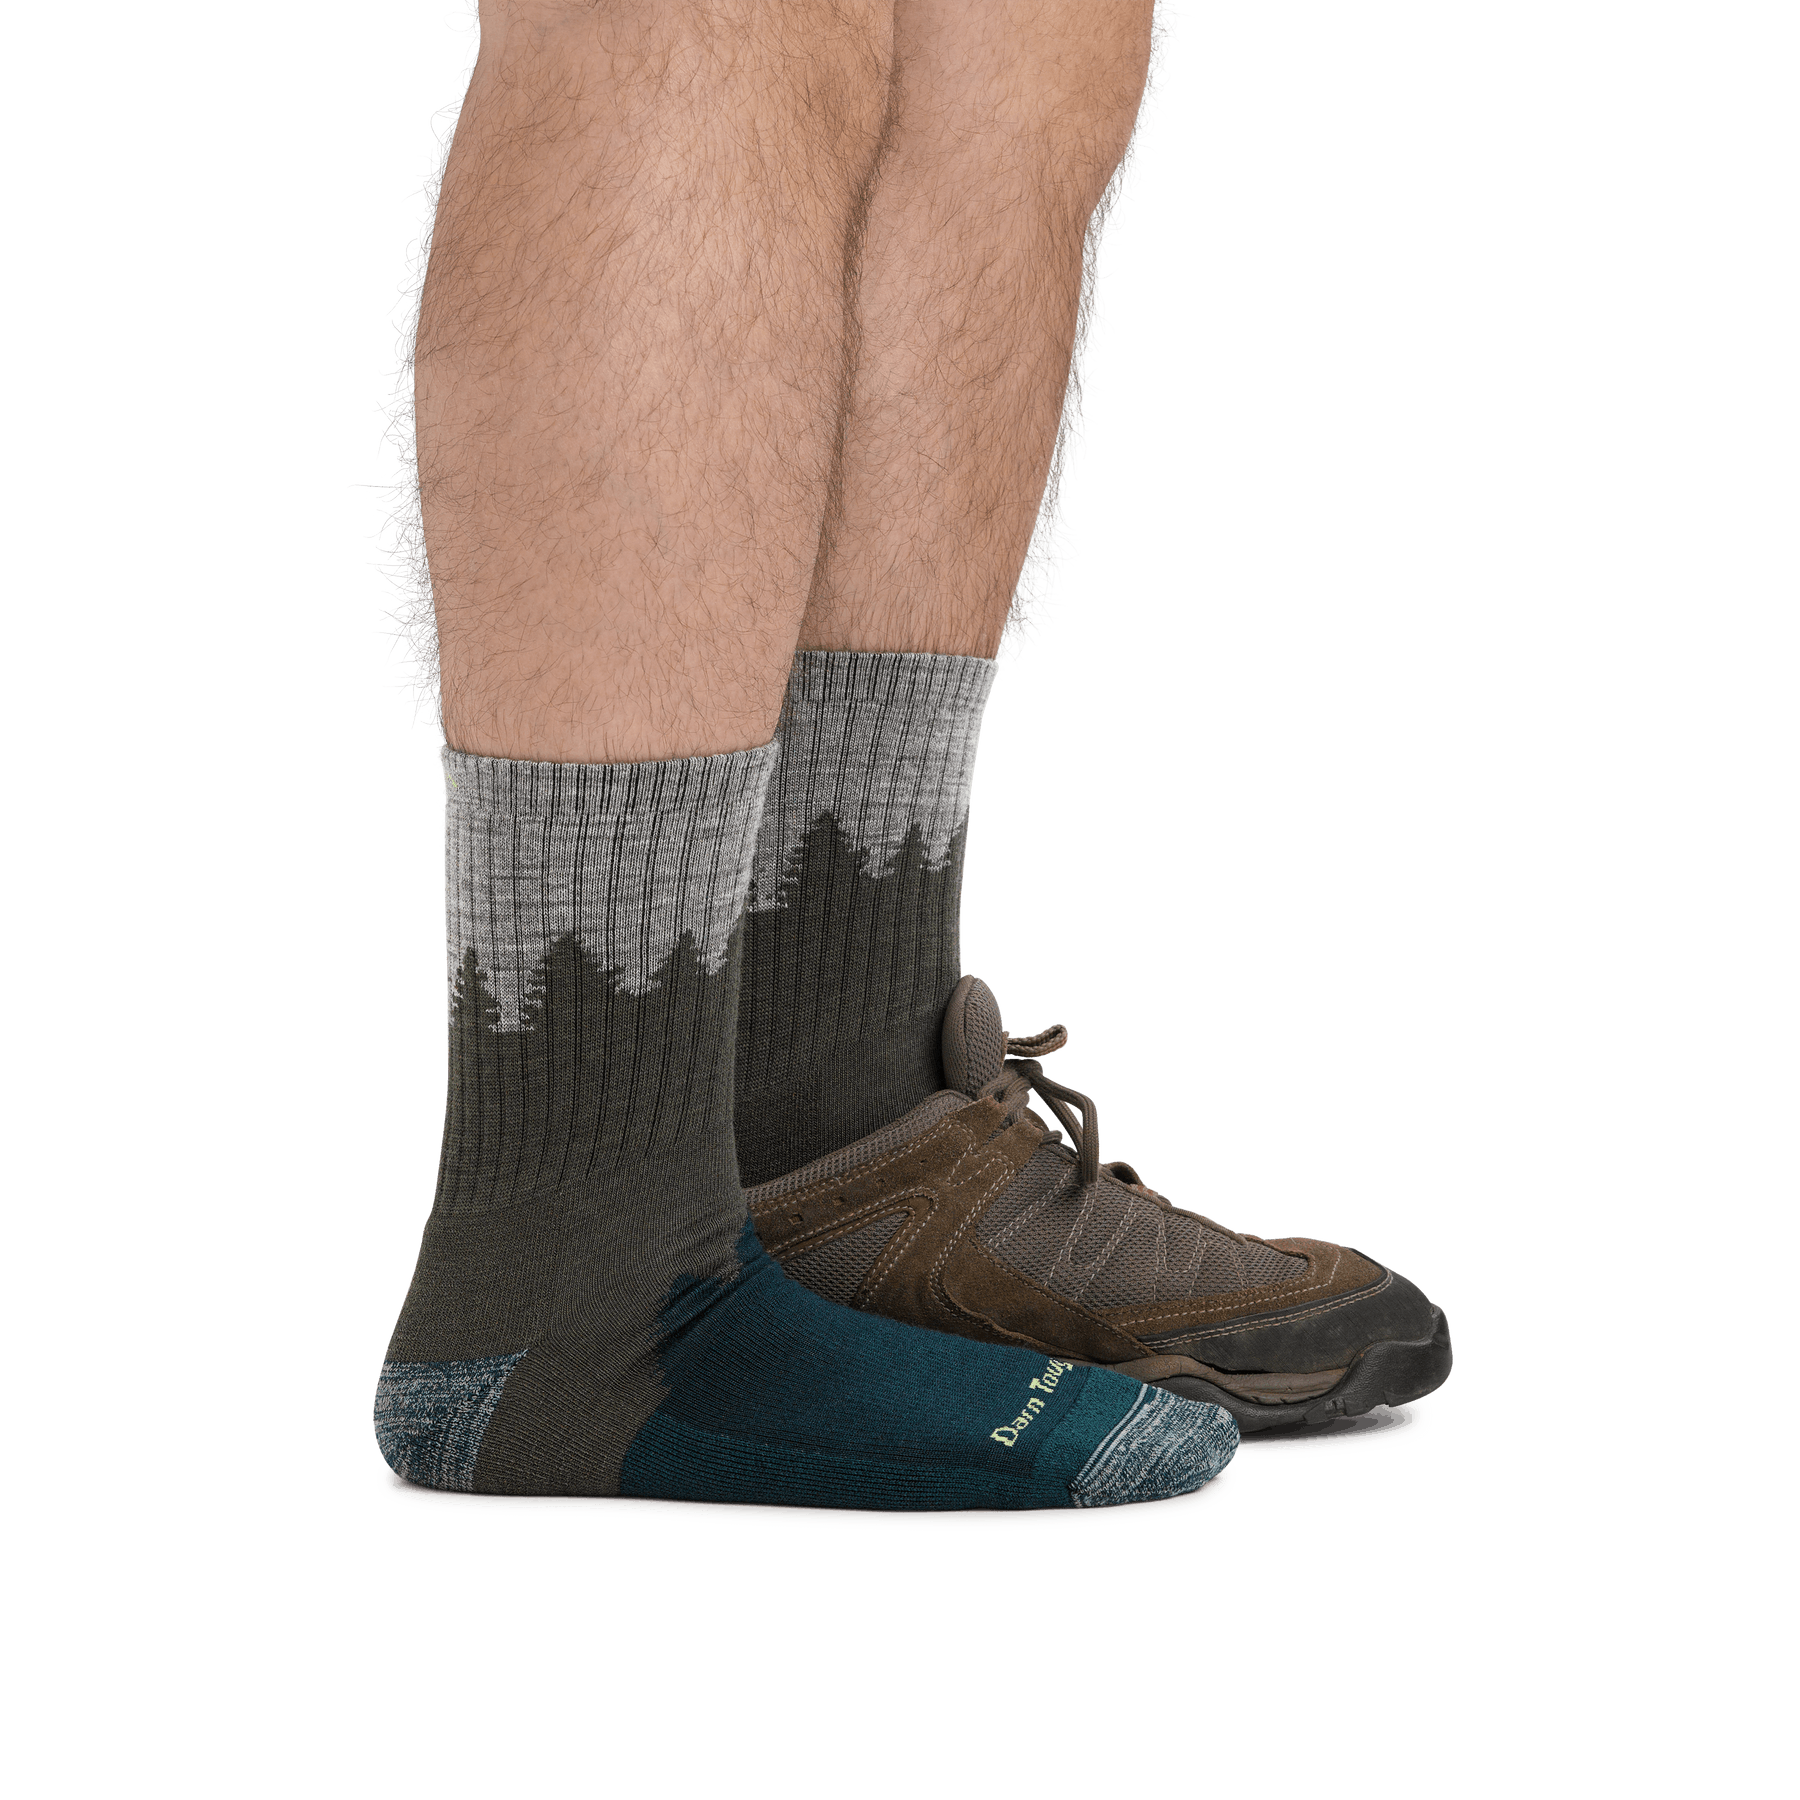 Darn Tough Men's Number 2 Micro Crew Midweight Hiking Socks with Cushion